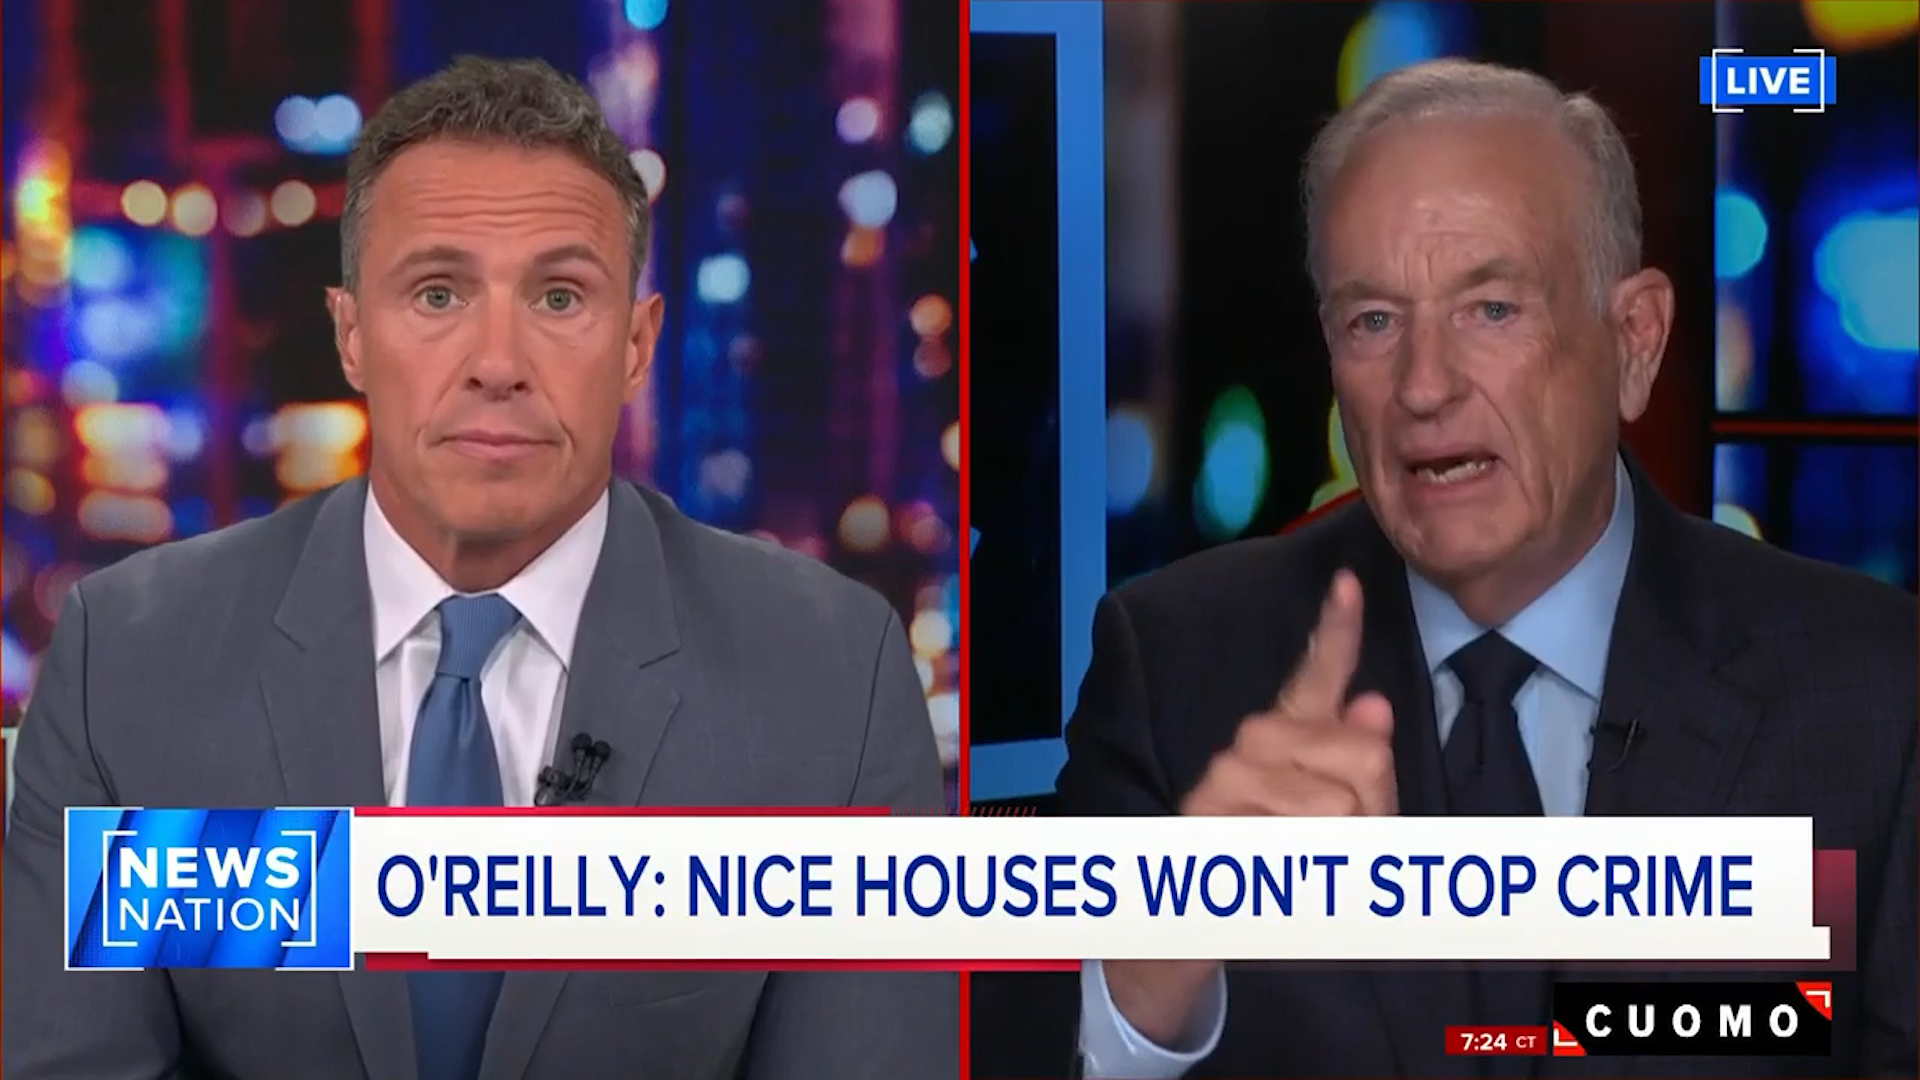 NewsNation: O'Reilly and Cuomo Butt Heads Over Trump Indictment